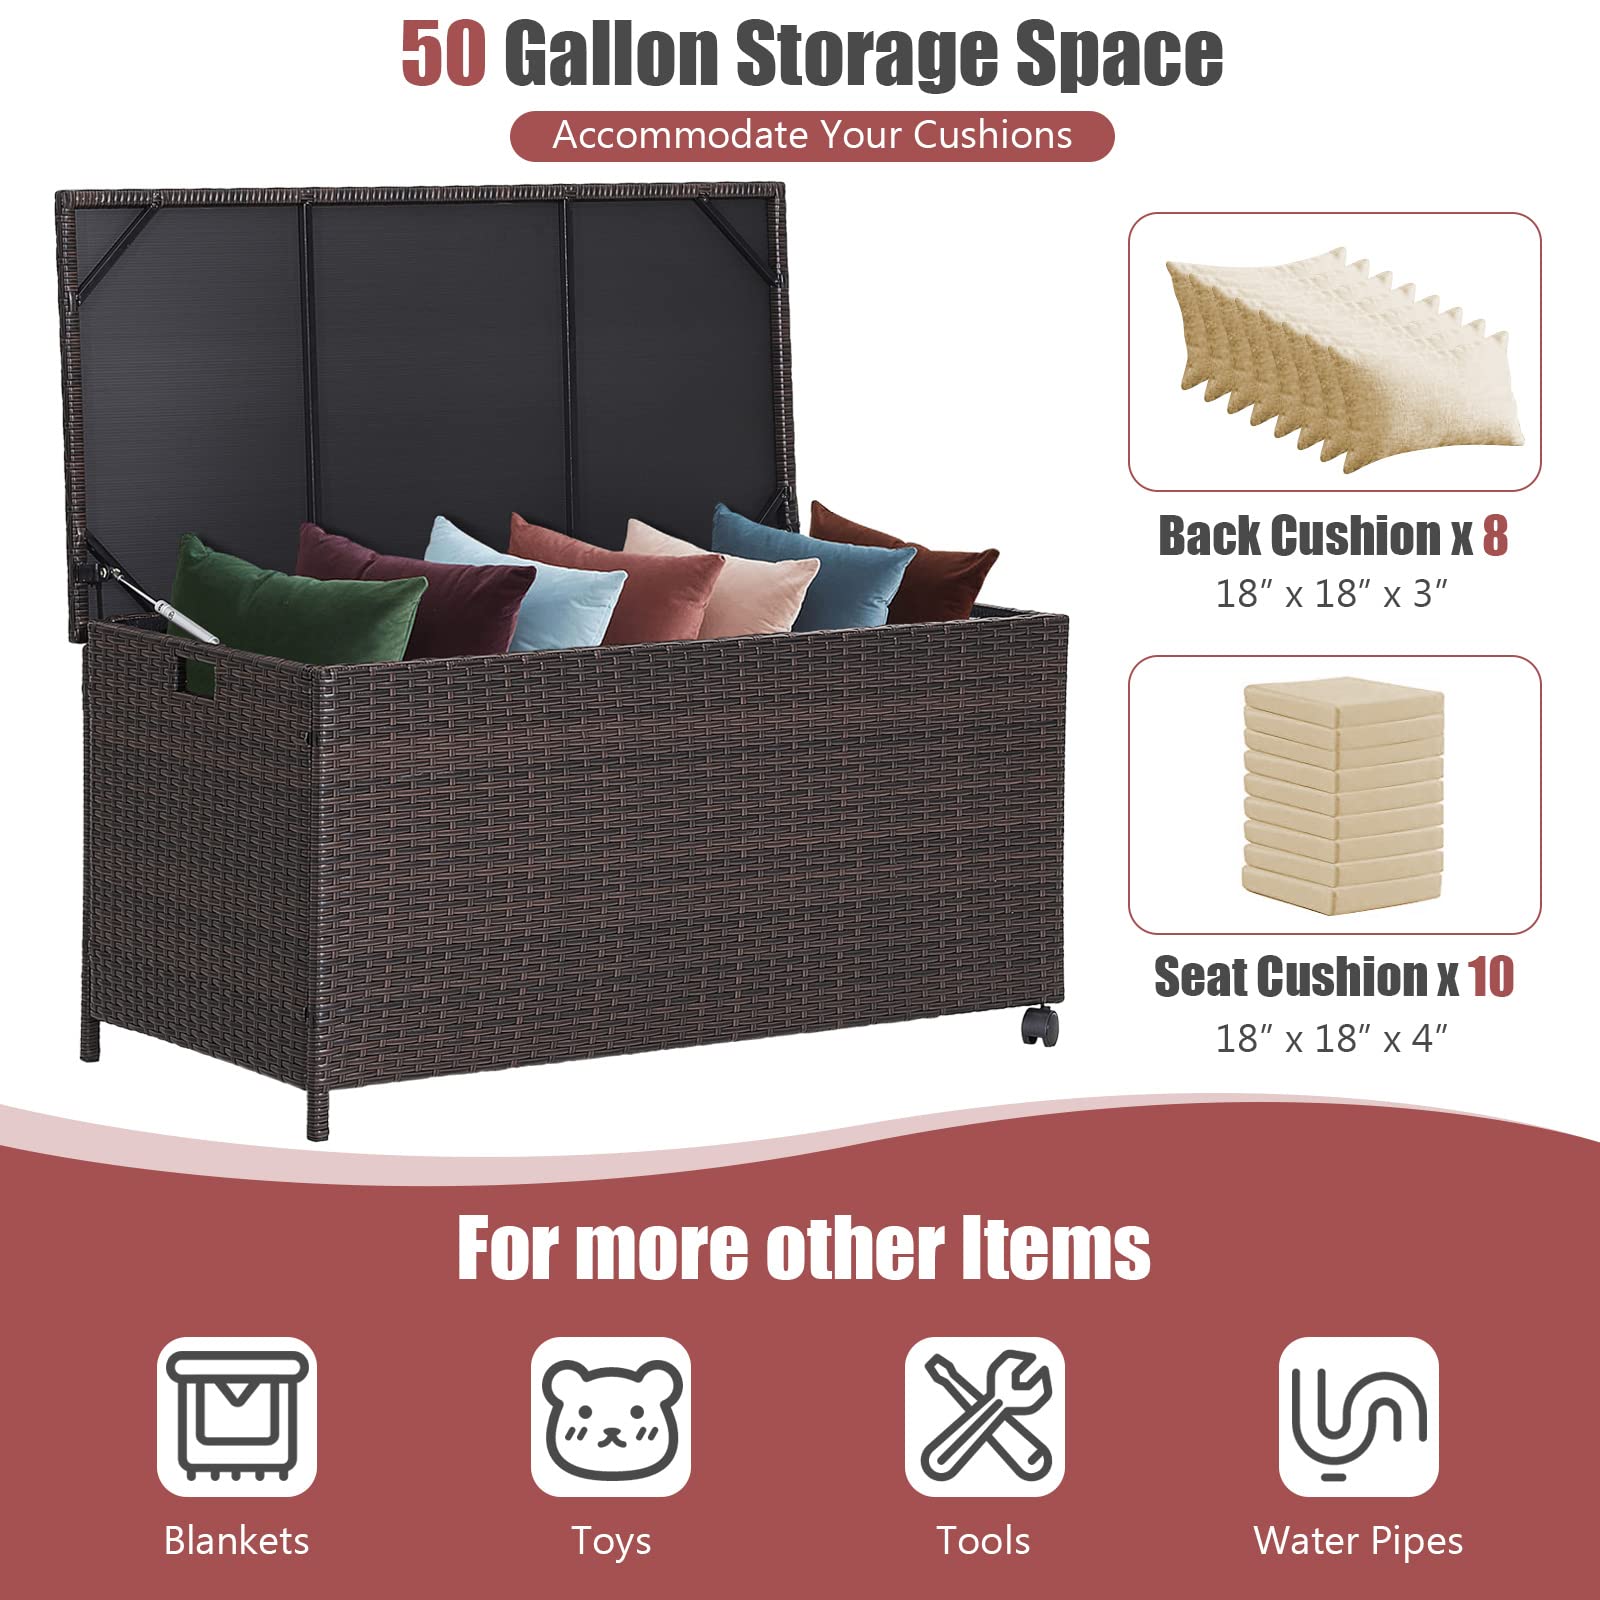 Giantex Outdoor Wicker Storage Box - 50 Gallon PE Rattan Storage Container with Lid, Mix Brown